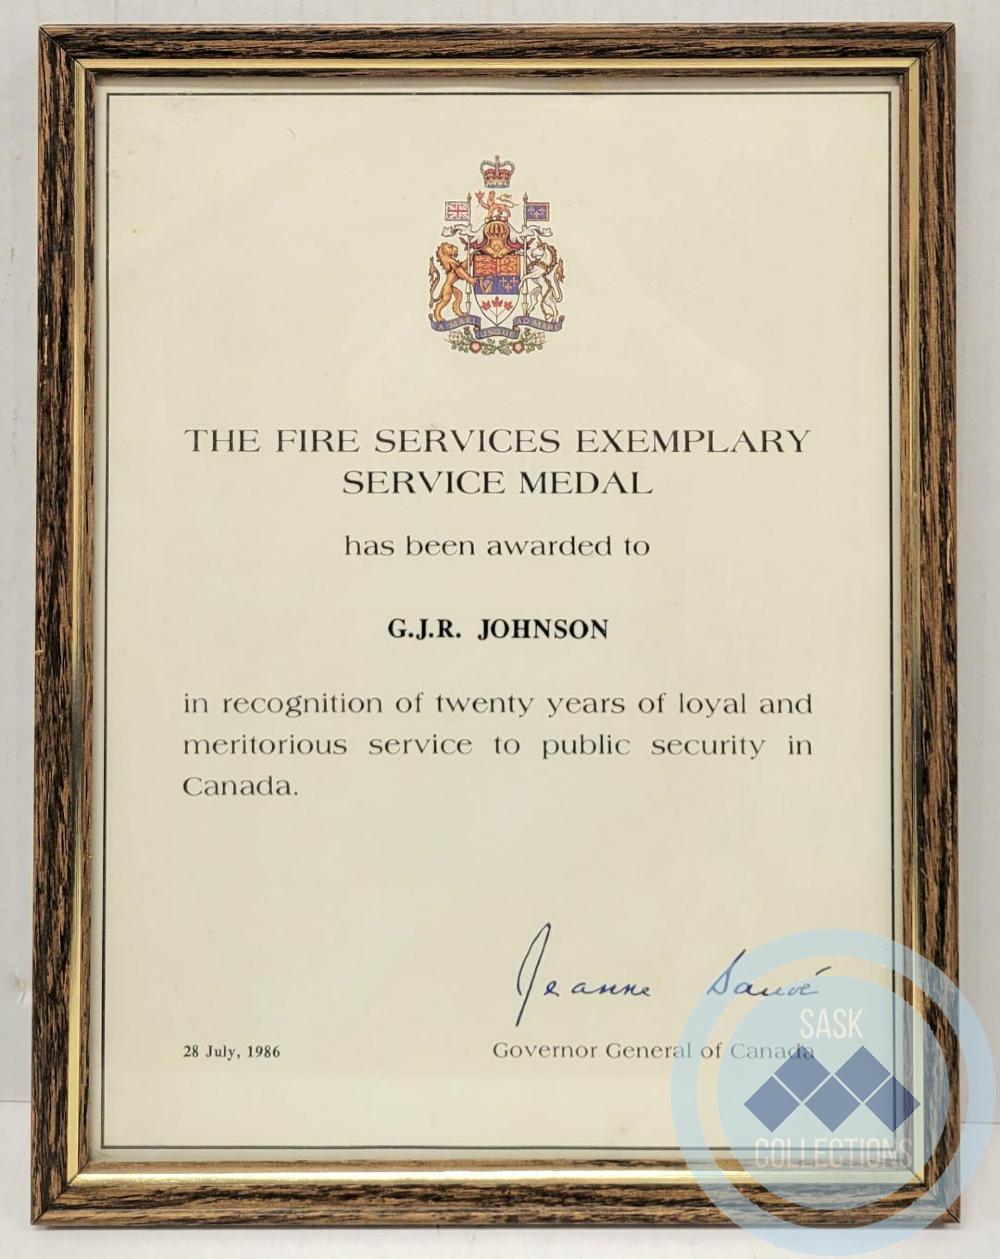 The Fire Services Exemplary Service Medal Certificate